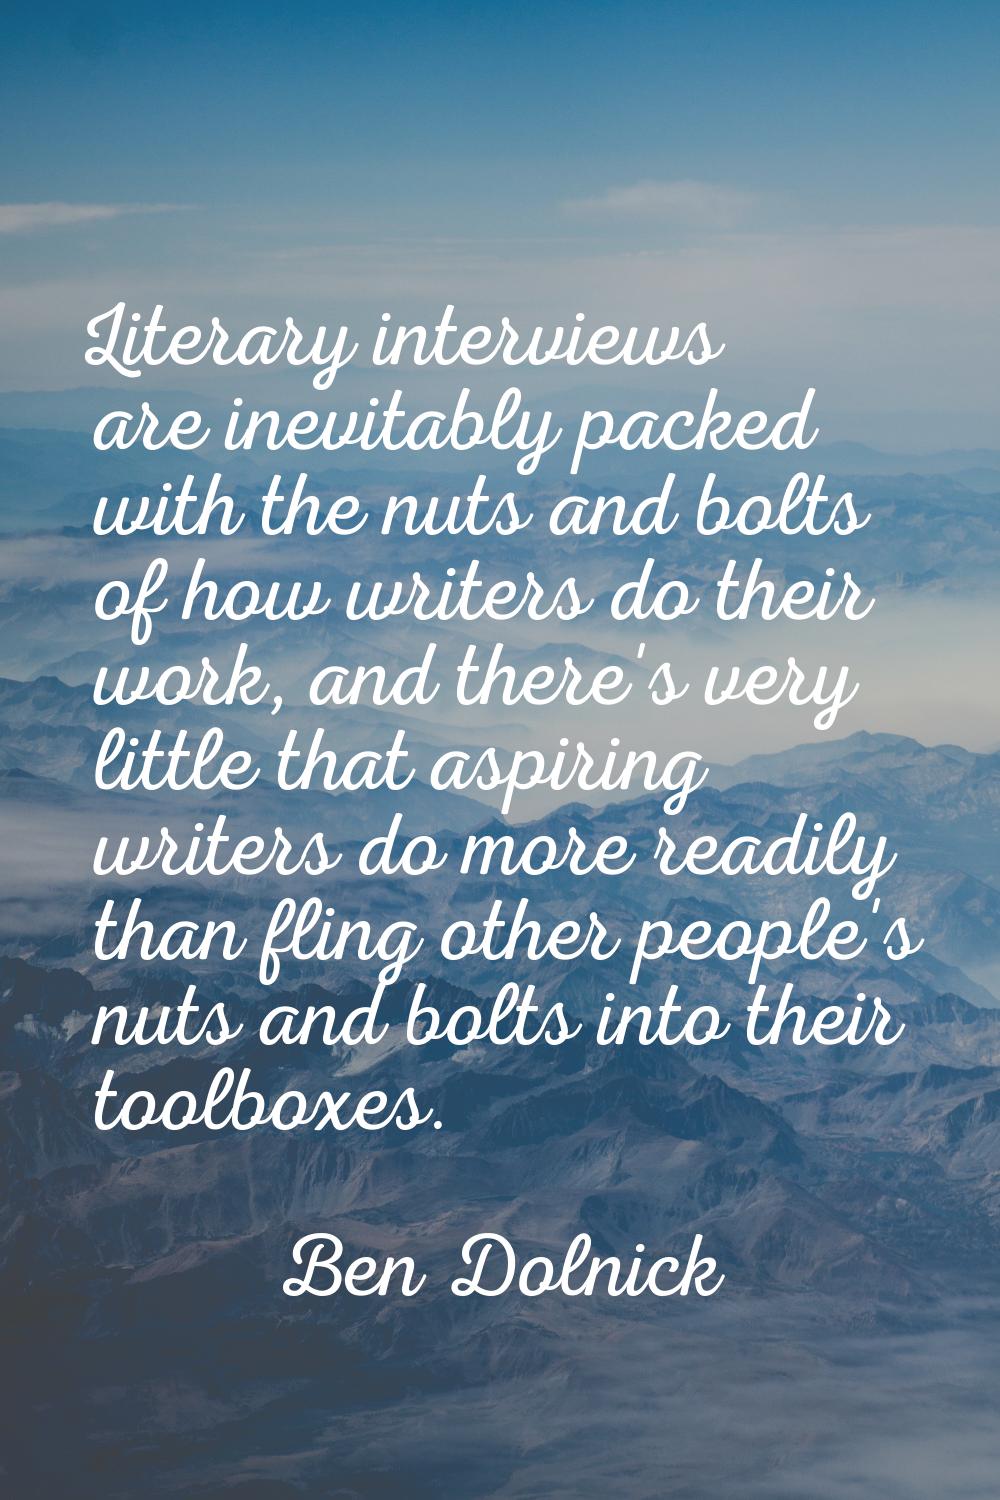 Literary interviews are inevitably packed with the nuts and bolts of how writers do their work, and